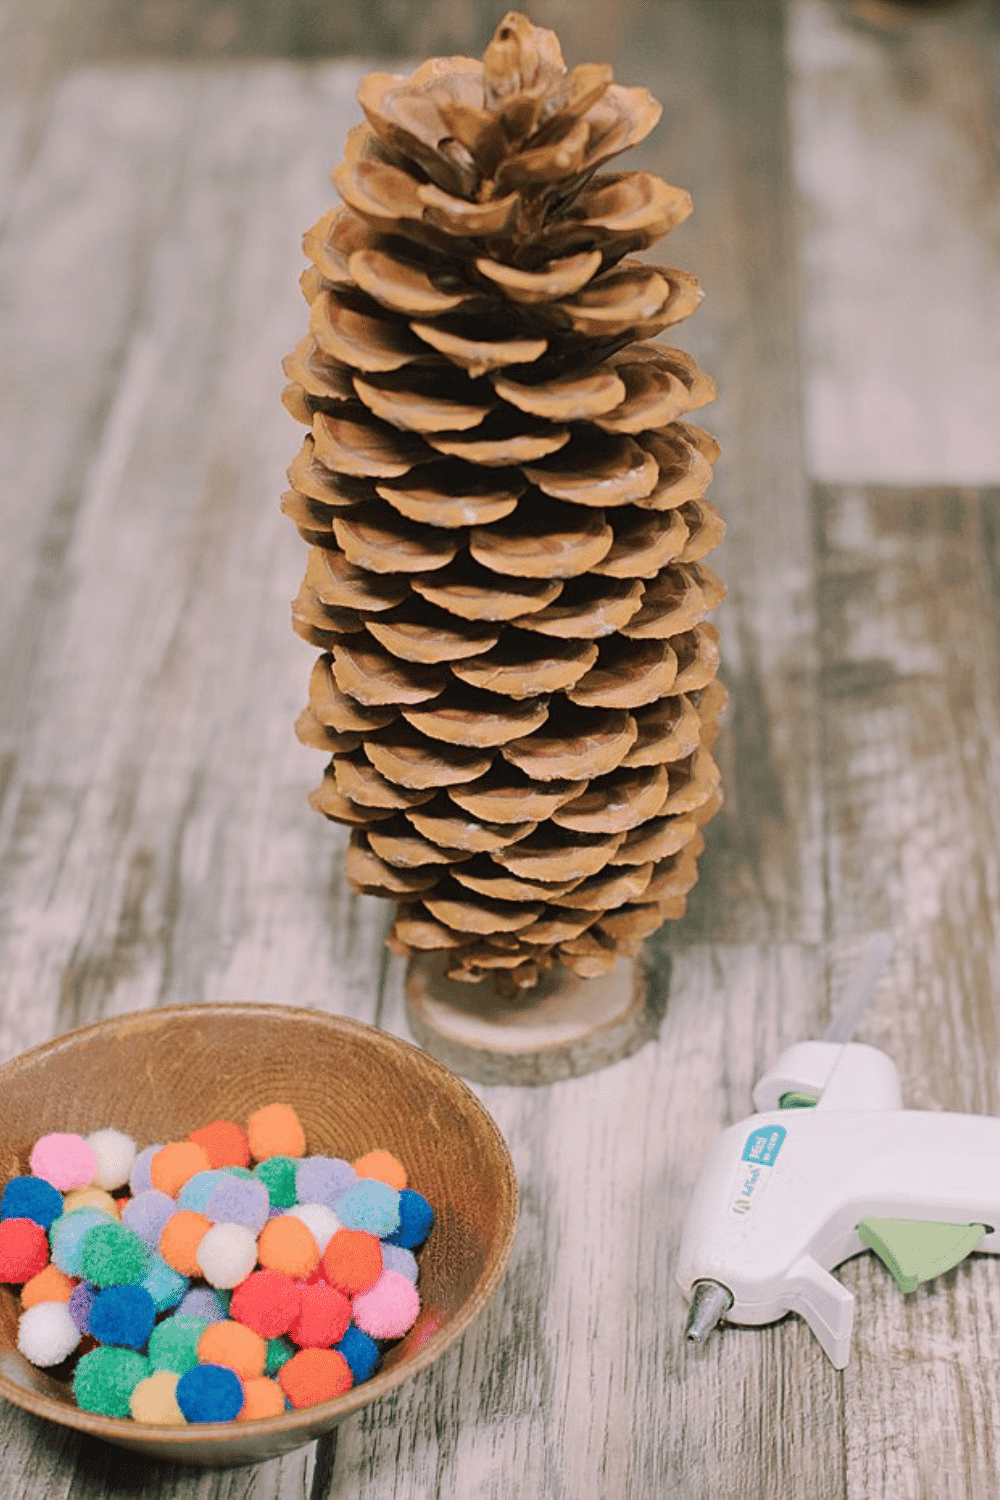 DIY Giant Pinecone Christmas Tree with Pompoms